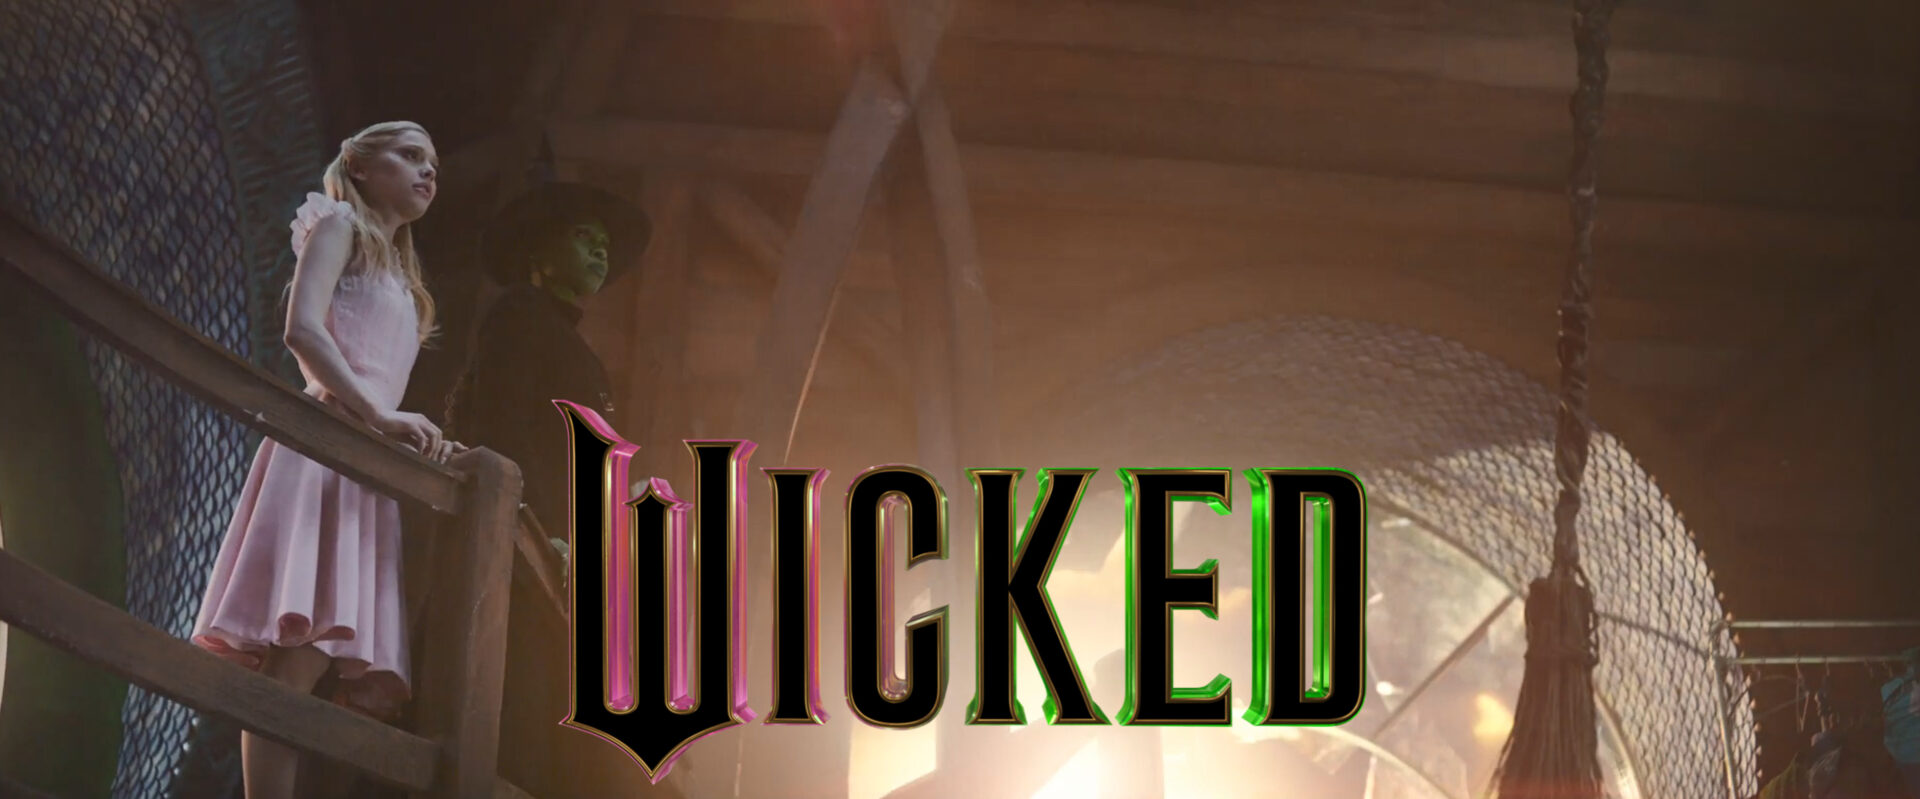 wicked theatrical trailer banner